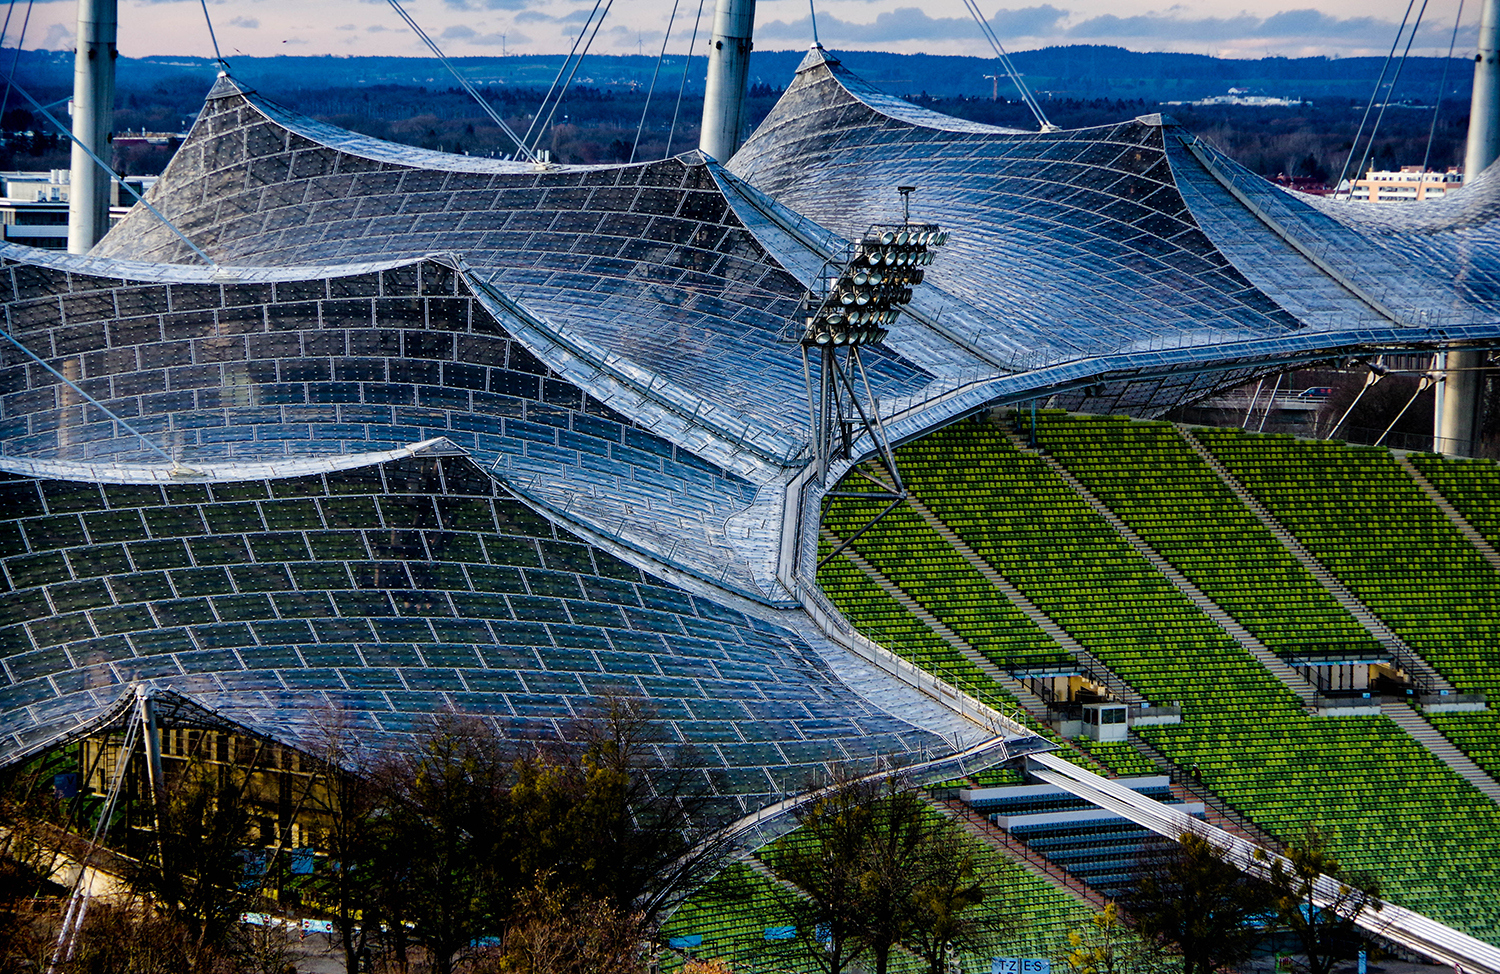 <p>The unique contours of the Munich Olympic Stadium, designed by architect Günther Behnisch and engineer Frei Otto for the summer games of 1972. The famous suspended roof — a vast tent of glass panels held aloft by steel cables and pillars — still looks futuristic almost 50 years after it was erected. </p>